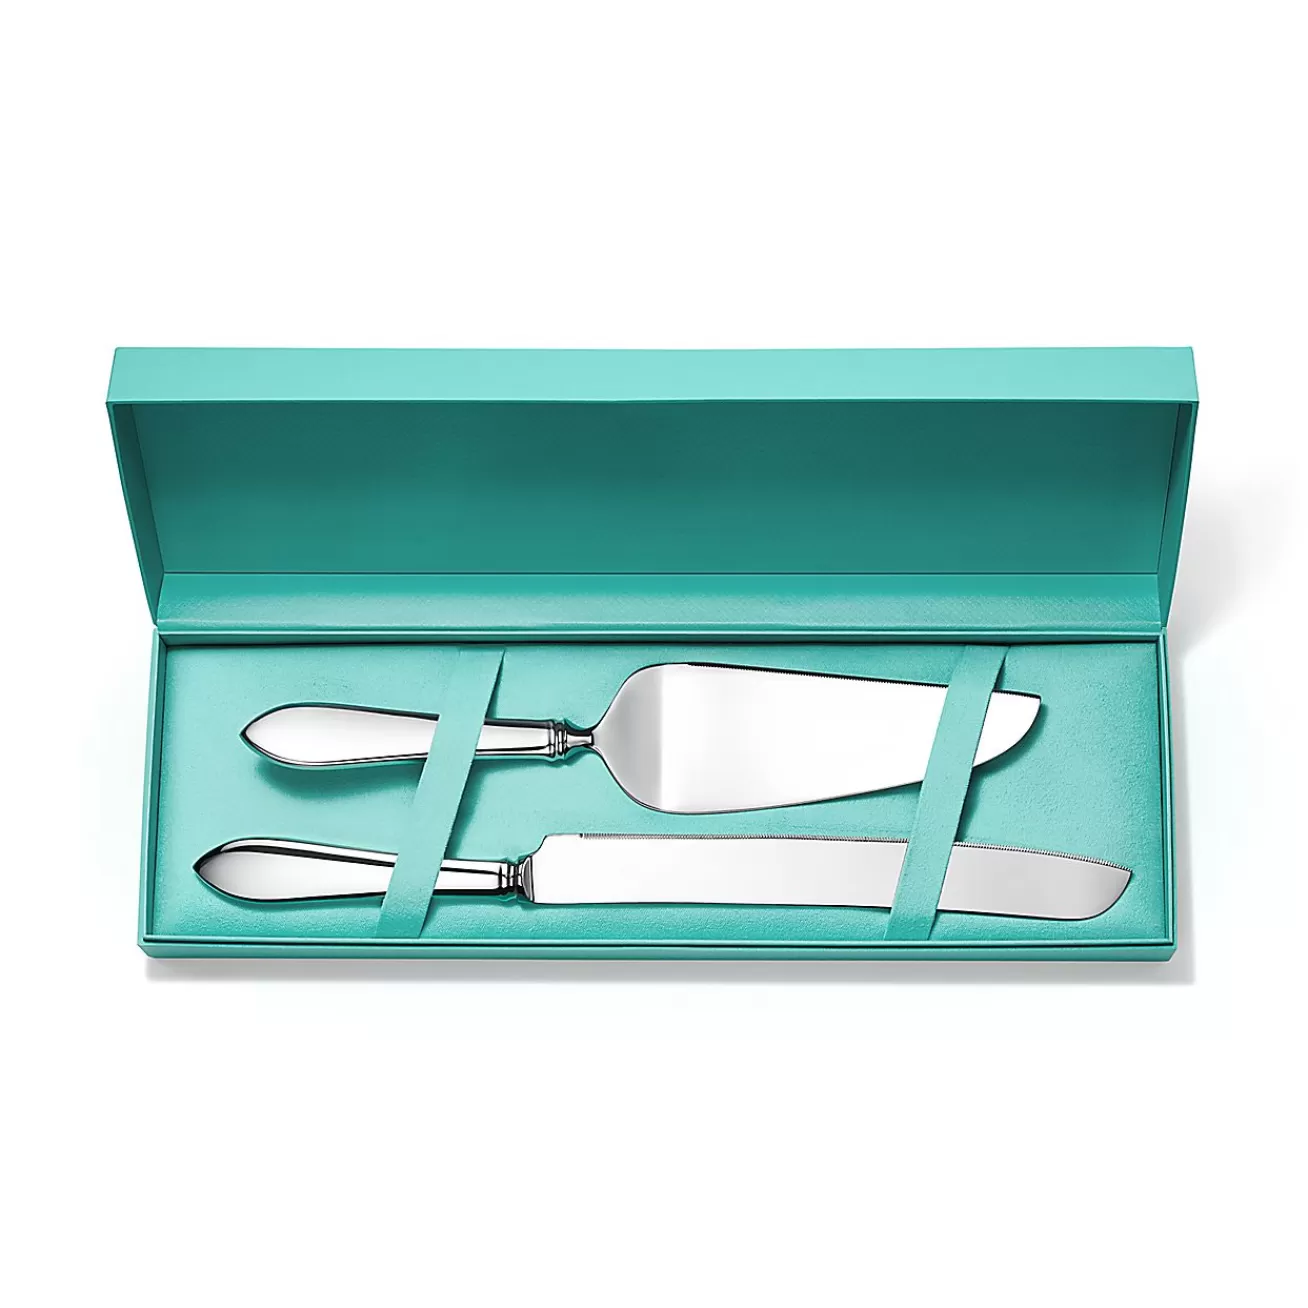 Tiffany & Co. Faneuil cake knife and server in sterling silver. | ^ Tableware | Flatware & Trays